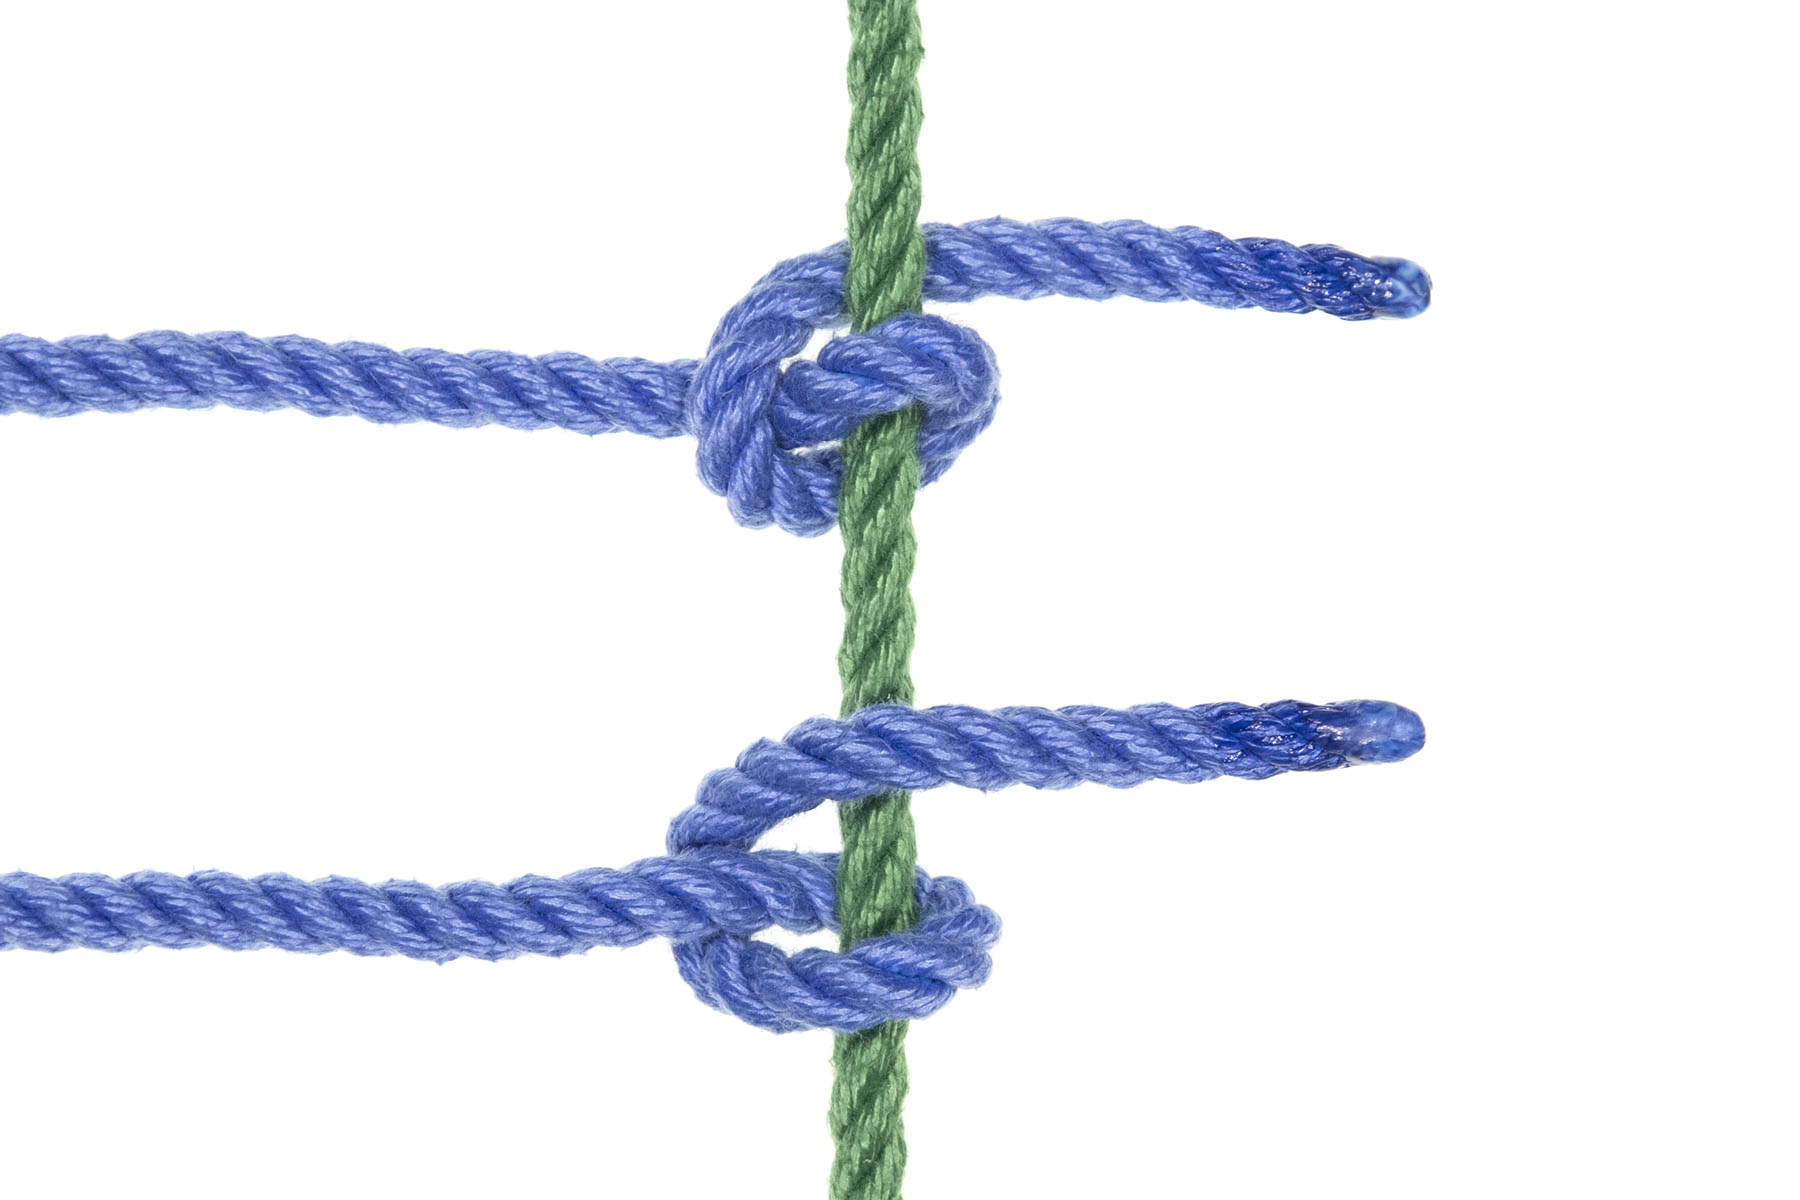 A green rope crosses the frame vertically. Two blue ropes enter from the left and make Munter frictions where they cross the green rope. The upper blue rope is a standard Munter that goes over the green rope, back under it, over itself, and under the green rope again. The lower blue rope makes an inverted Munter that goes under the green rope, back over it, under itself, and over the green rope again.